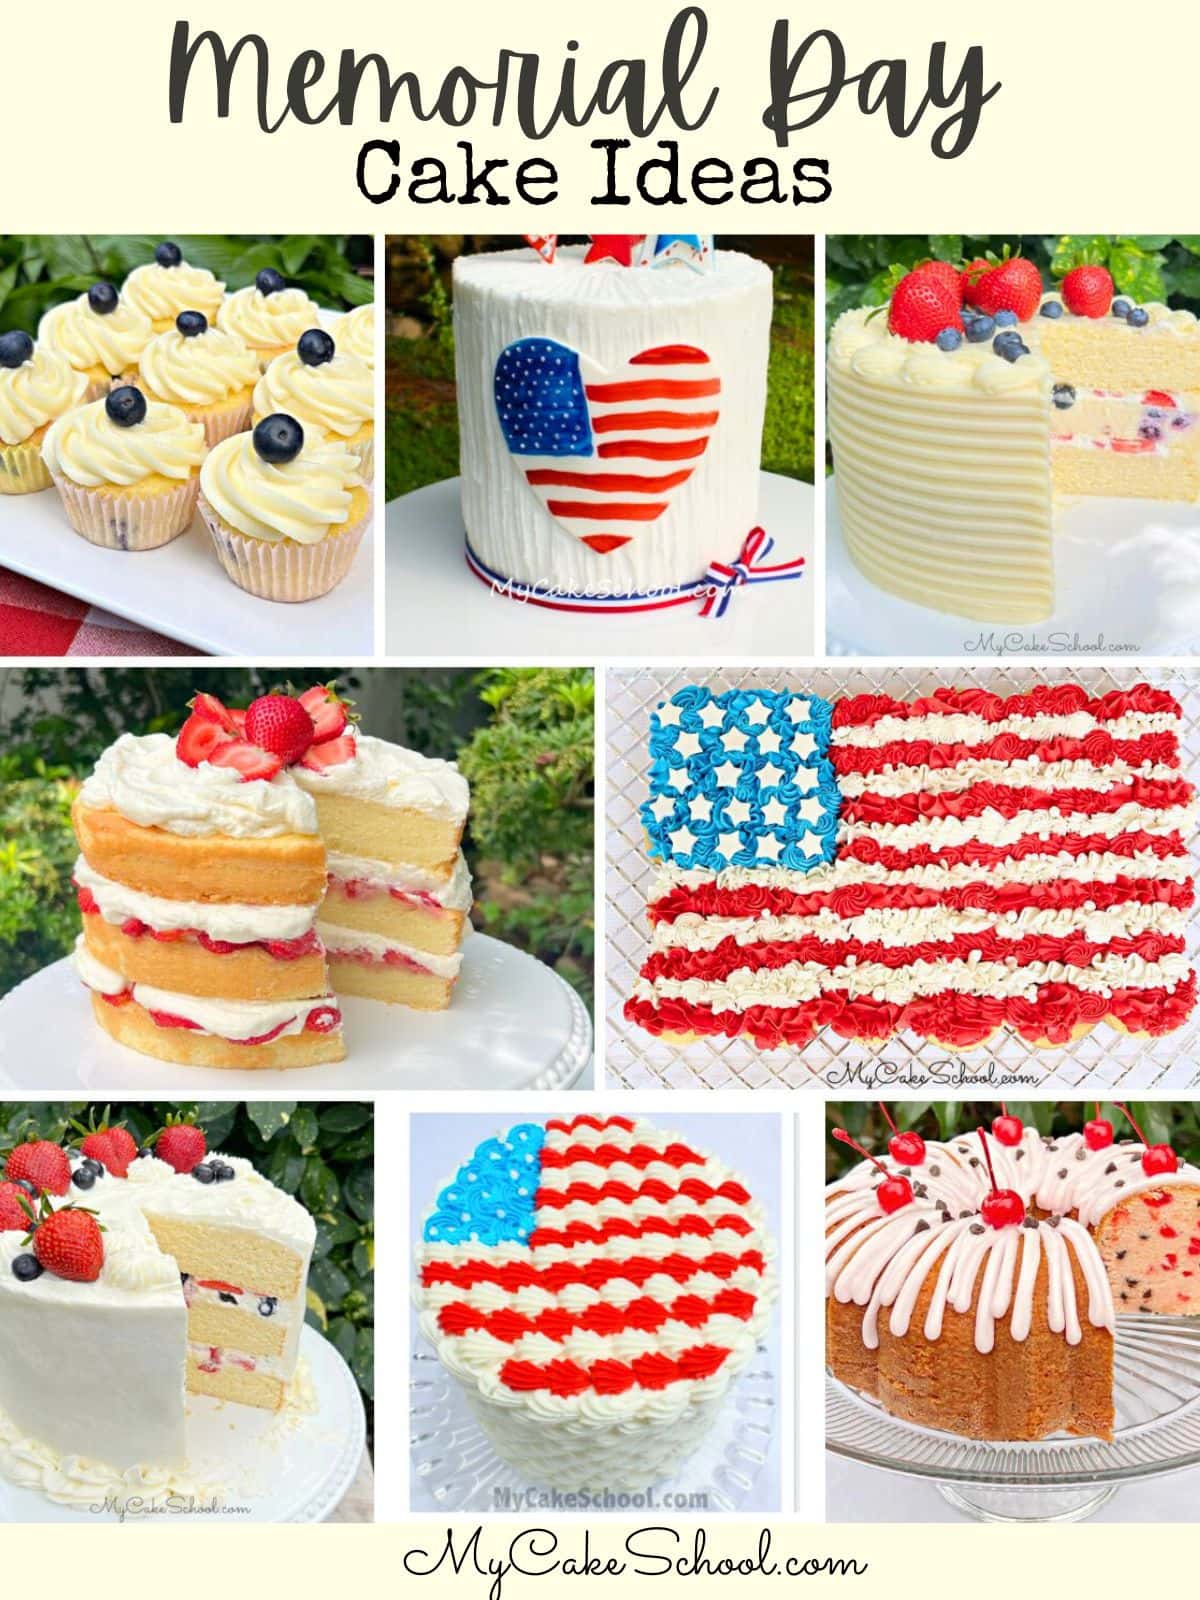 Collage of favorite cakes for memorial day- fruity cakes, patriotic cakes, and more